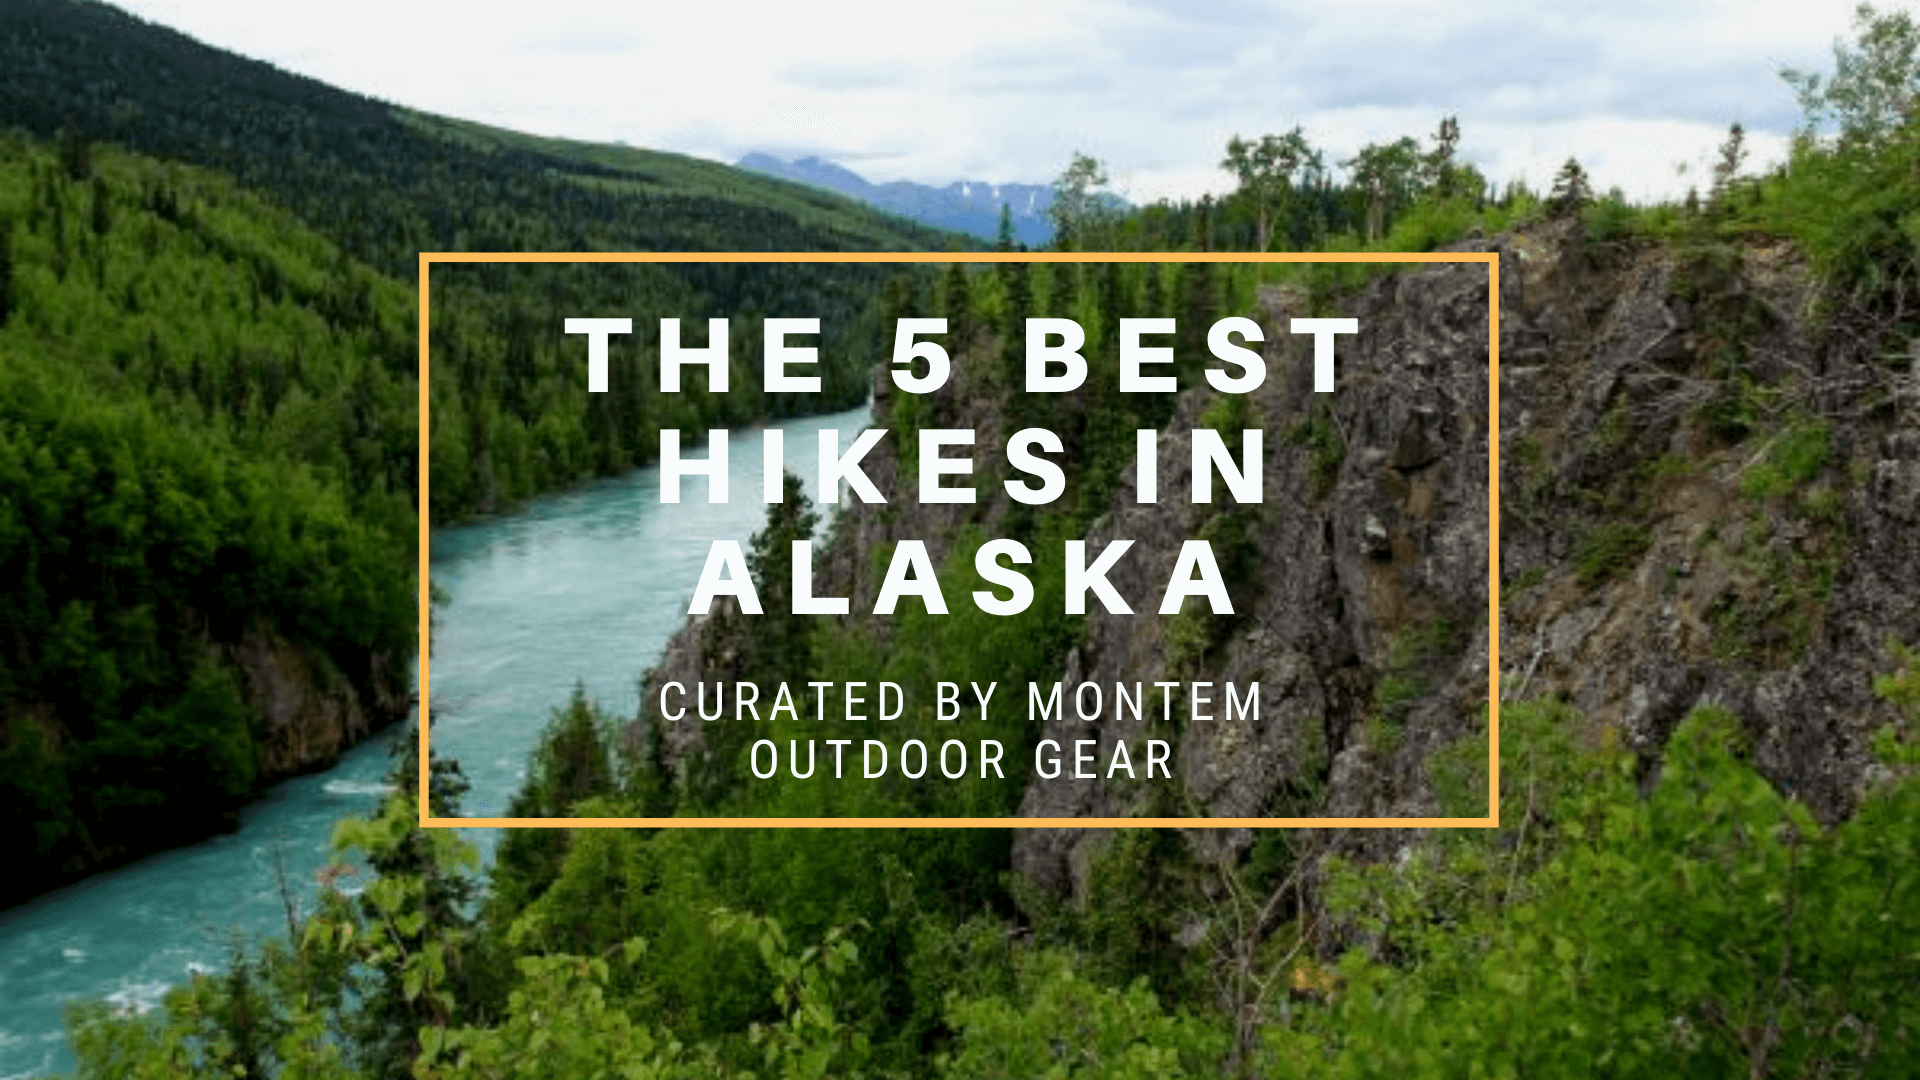 The 5 Best Hikes in Alaska